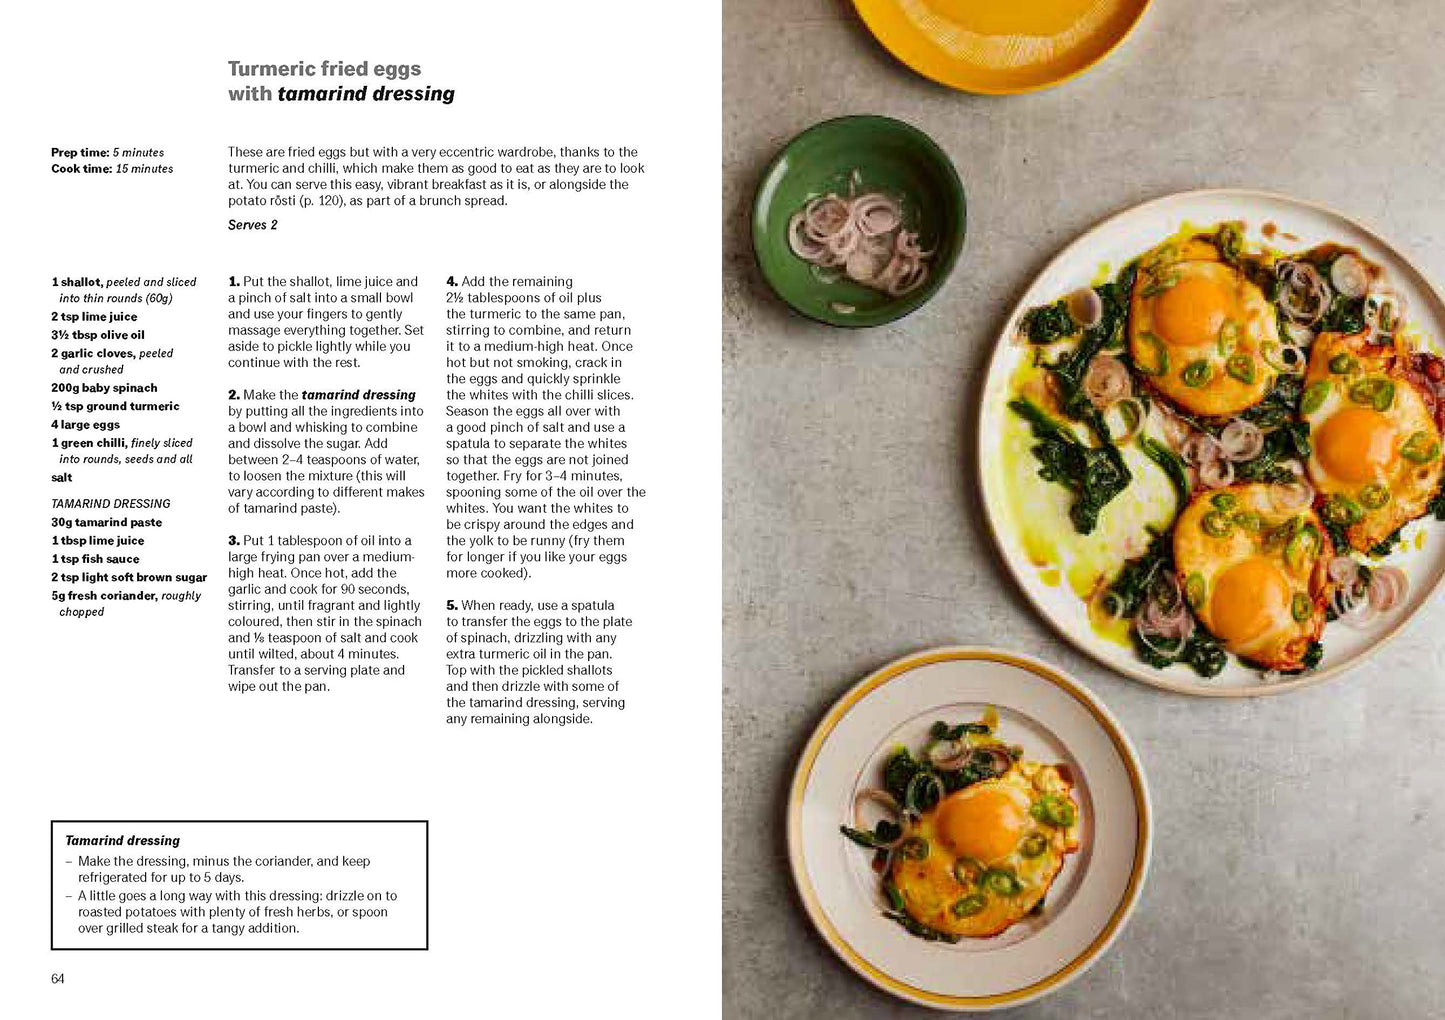 Ottolenghi Test Kitchen: Extra Good Things, Noor Murad, Yotam Ottolenghi